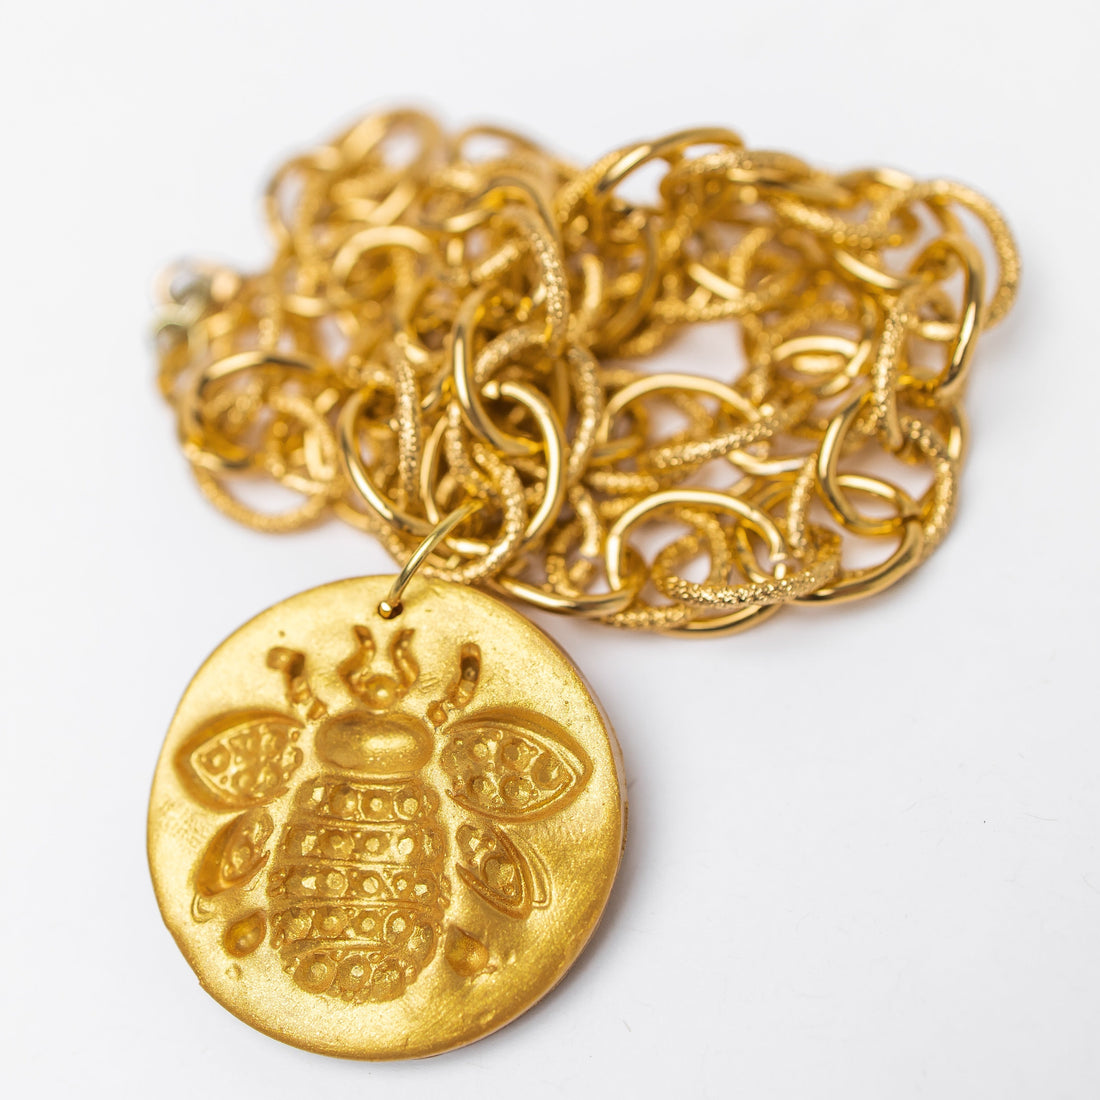 Gold Chain with Bee Medallion